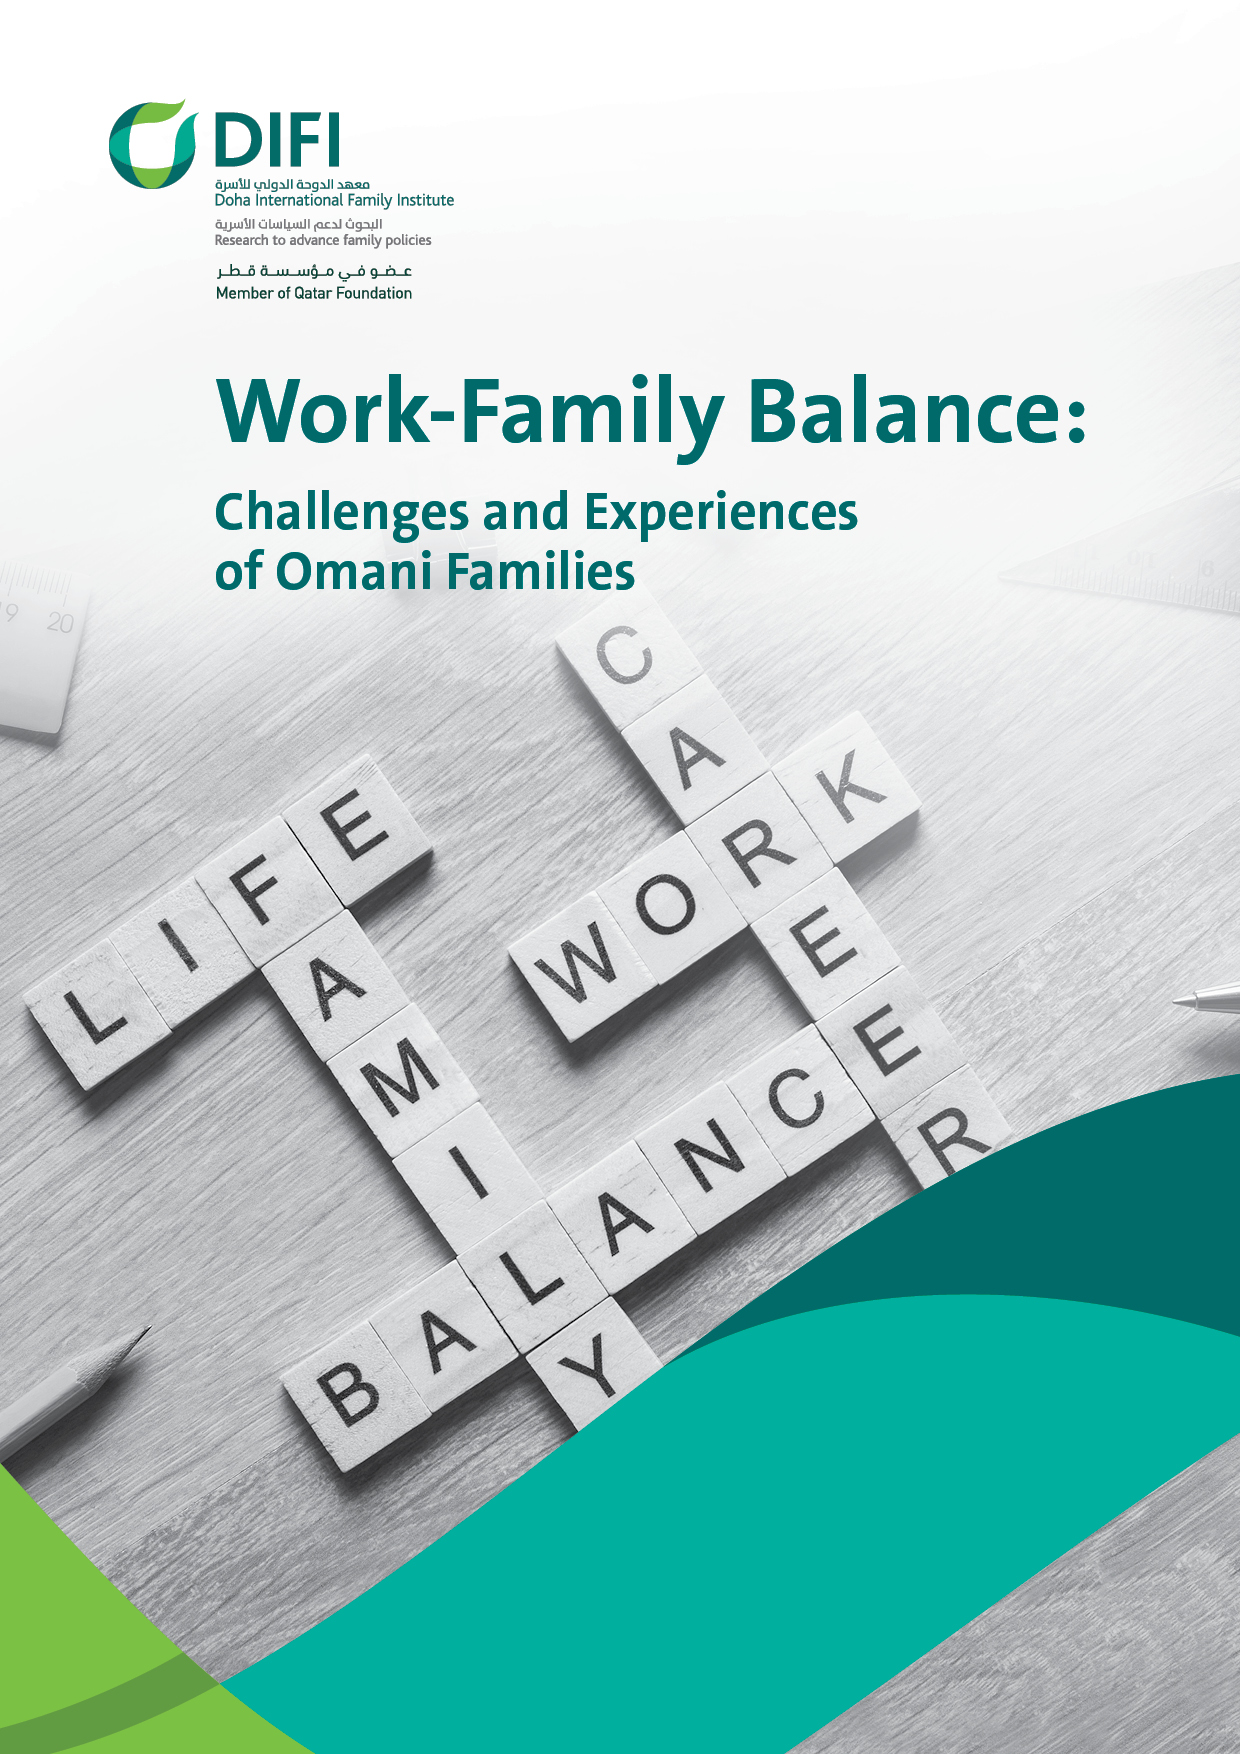 image of Work-Family Balance: Challenges and Experiences of Omani Families